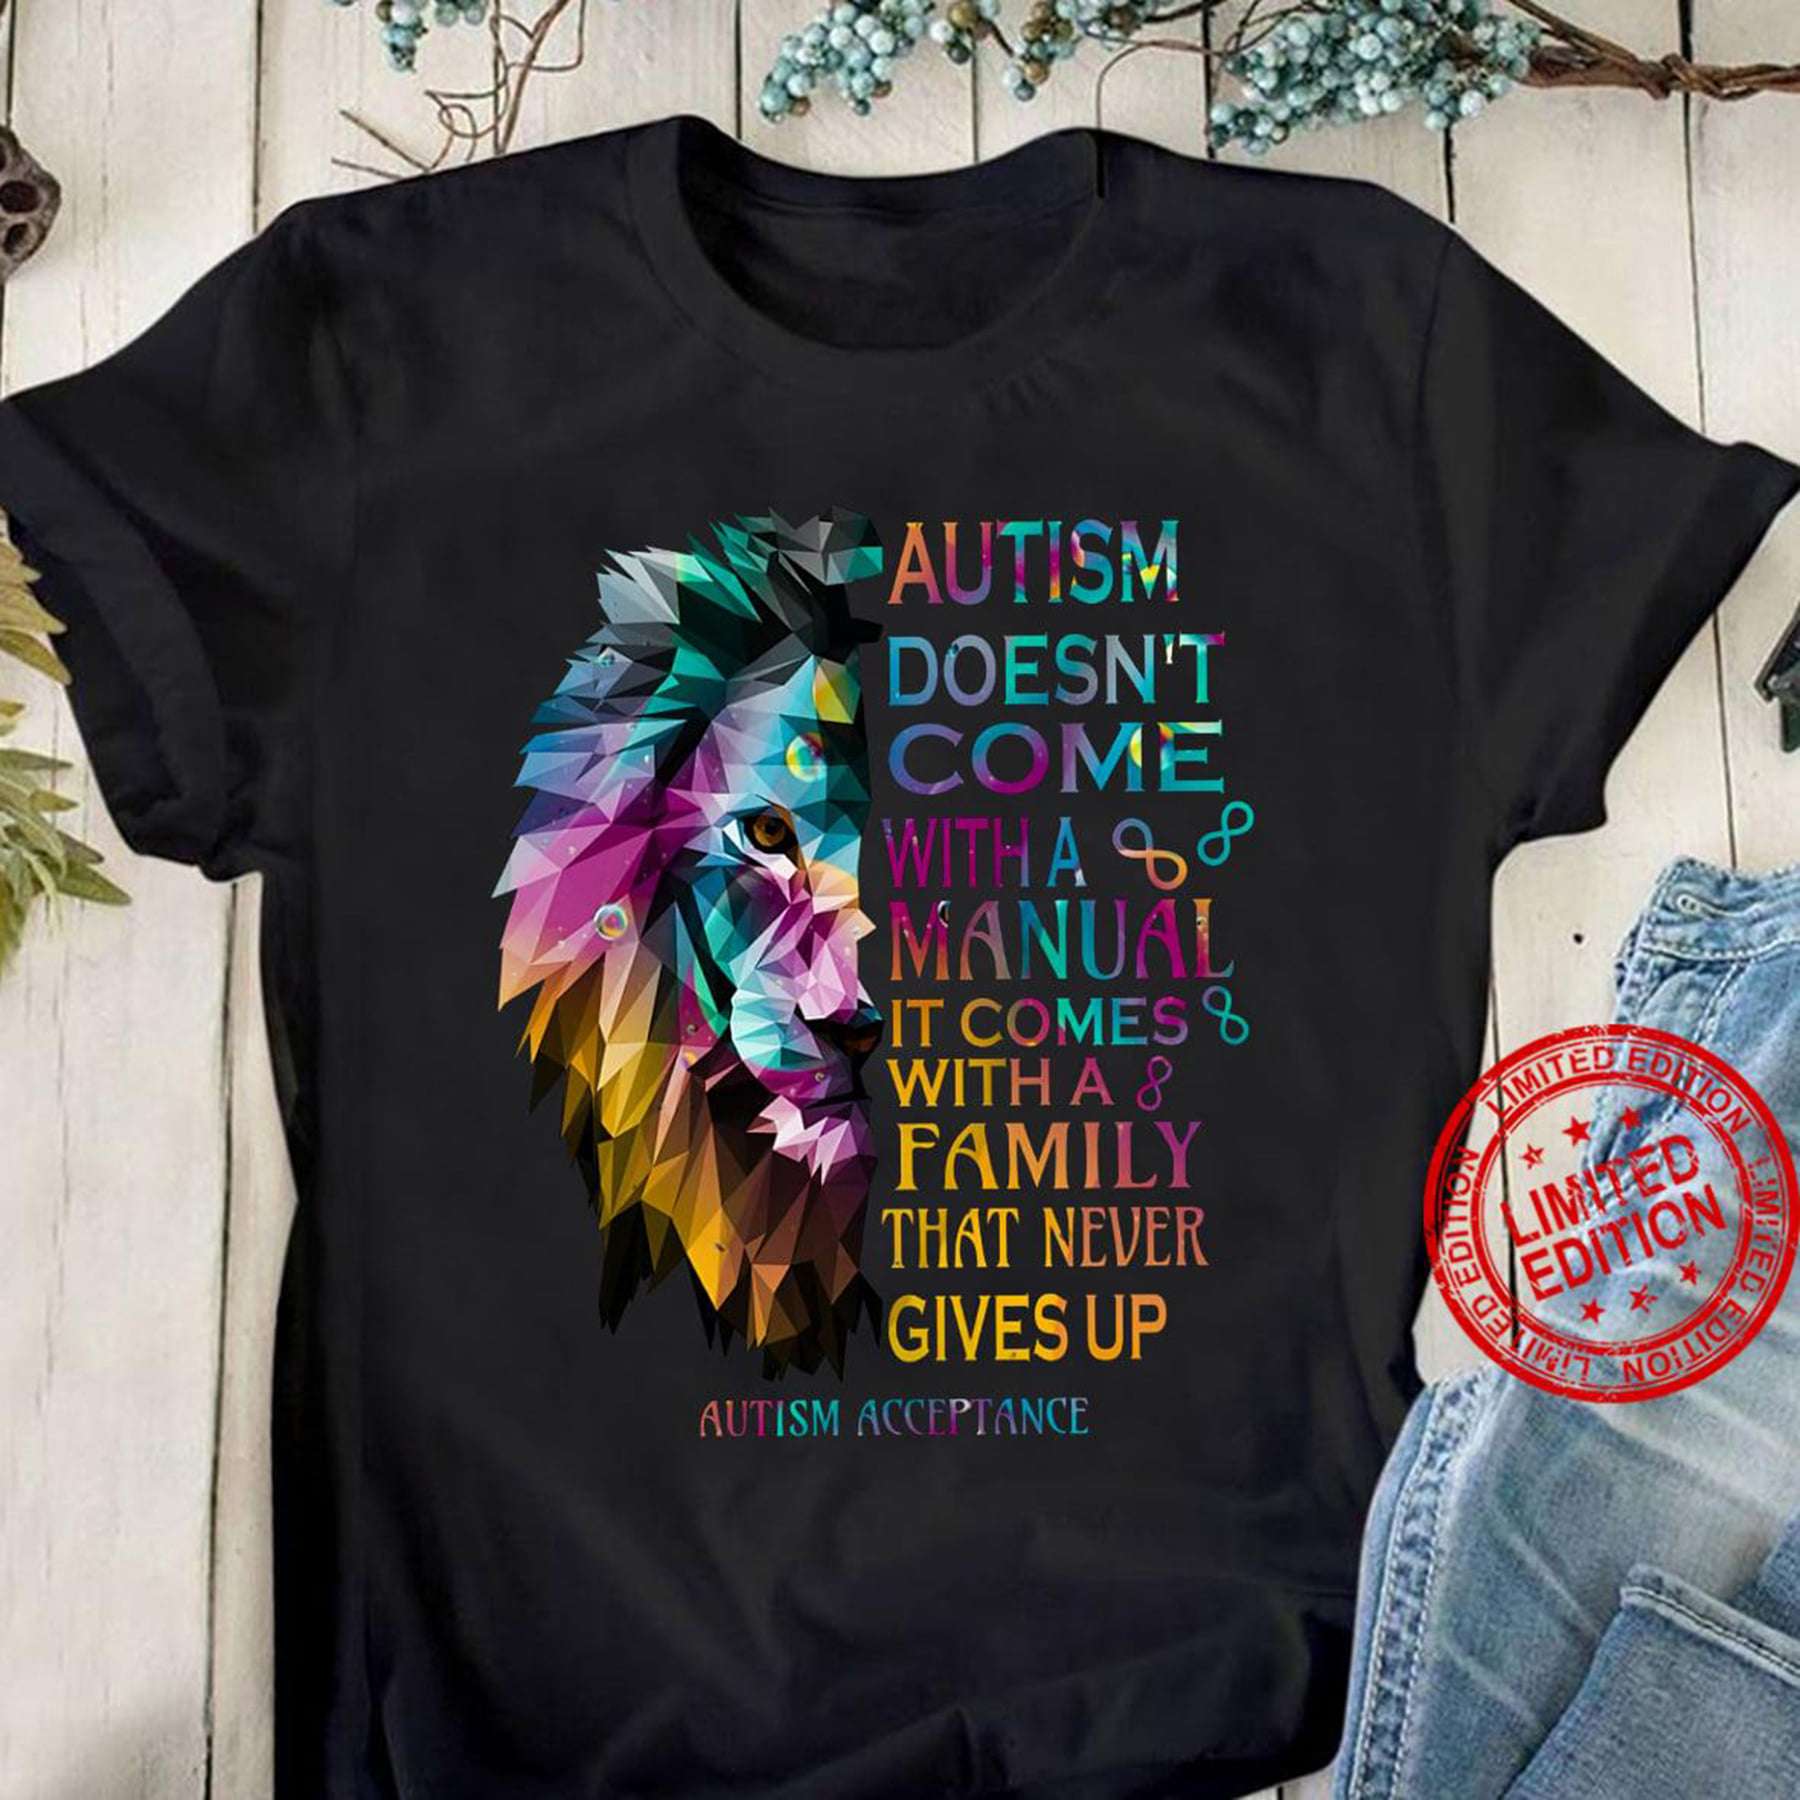 Autism doesn't come with a manual it comes with a family that never ...